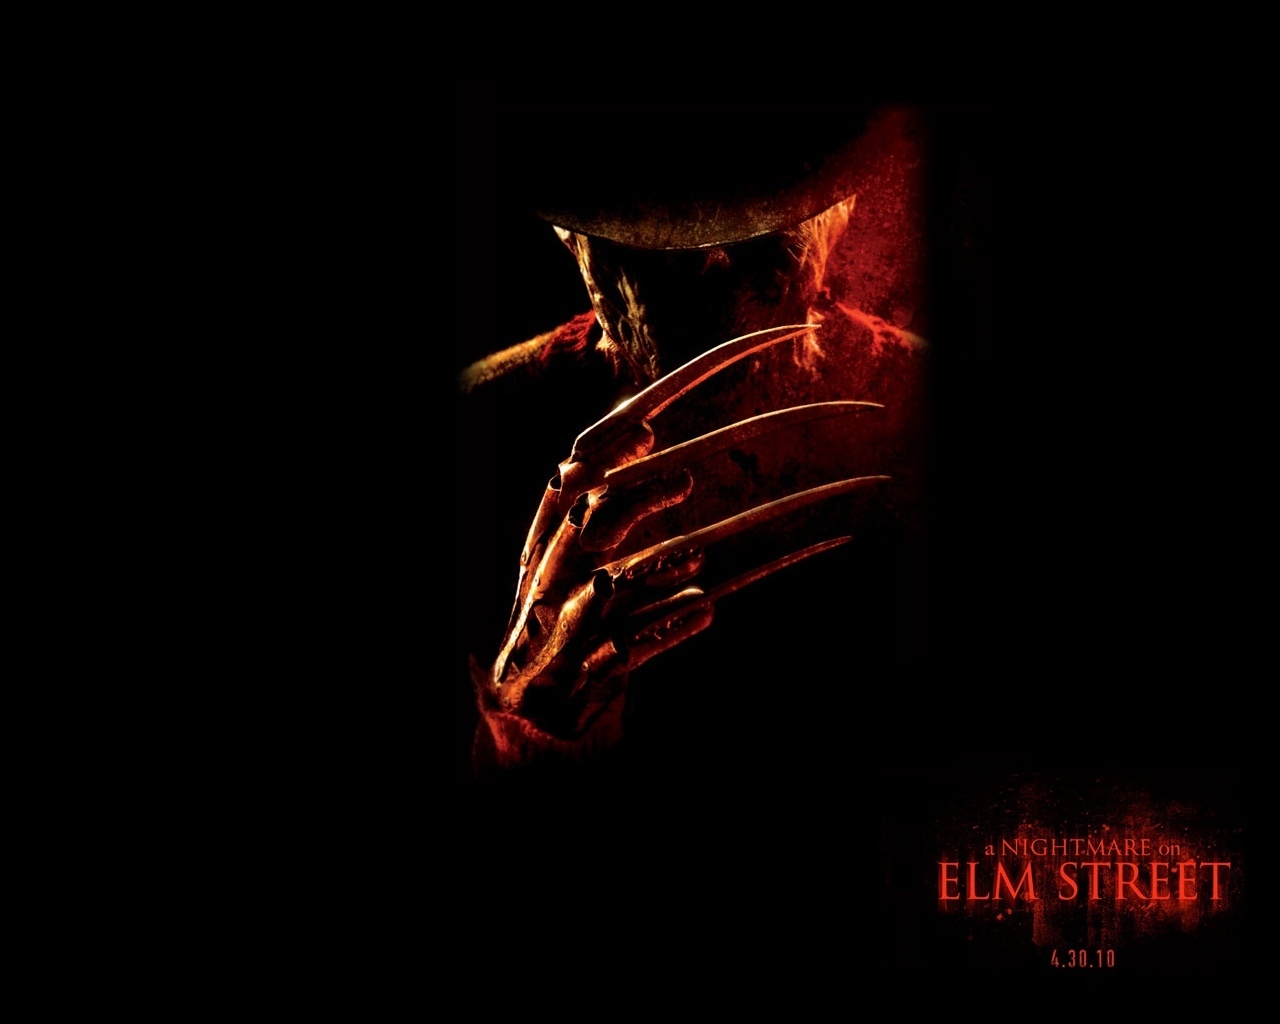 A Nightmare on Elm Street 2010 for 1280 x 1024 resolution